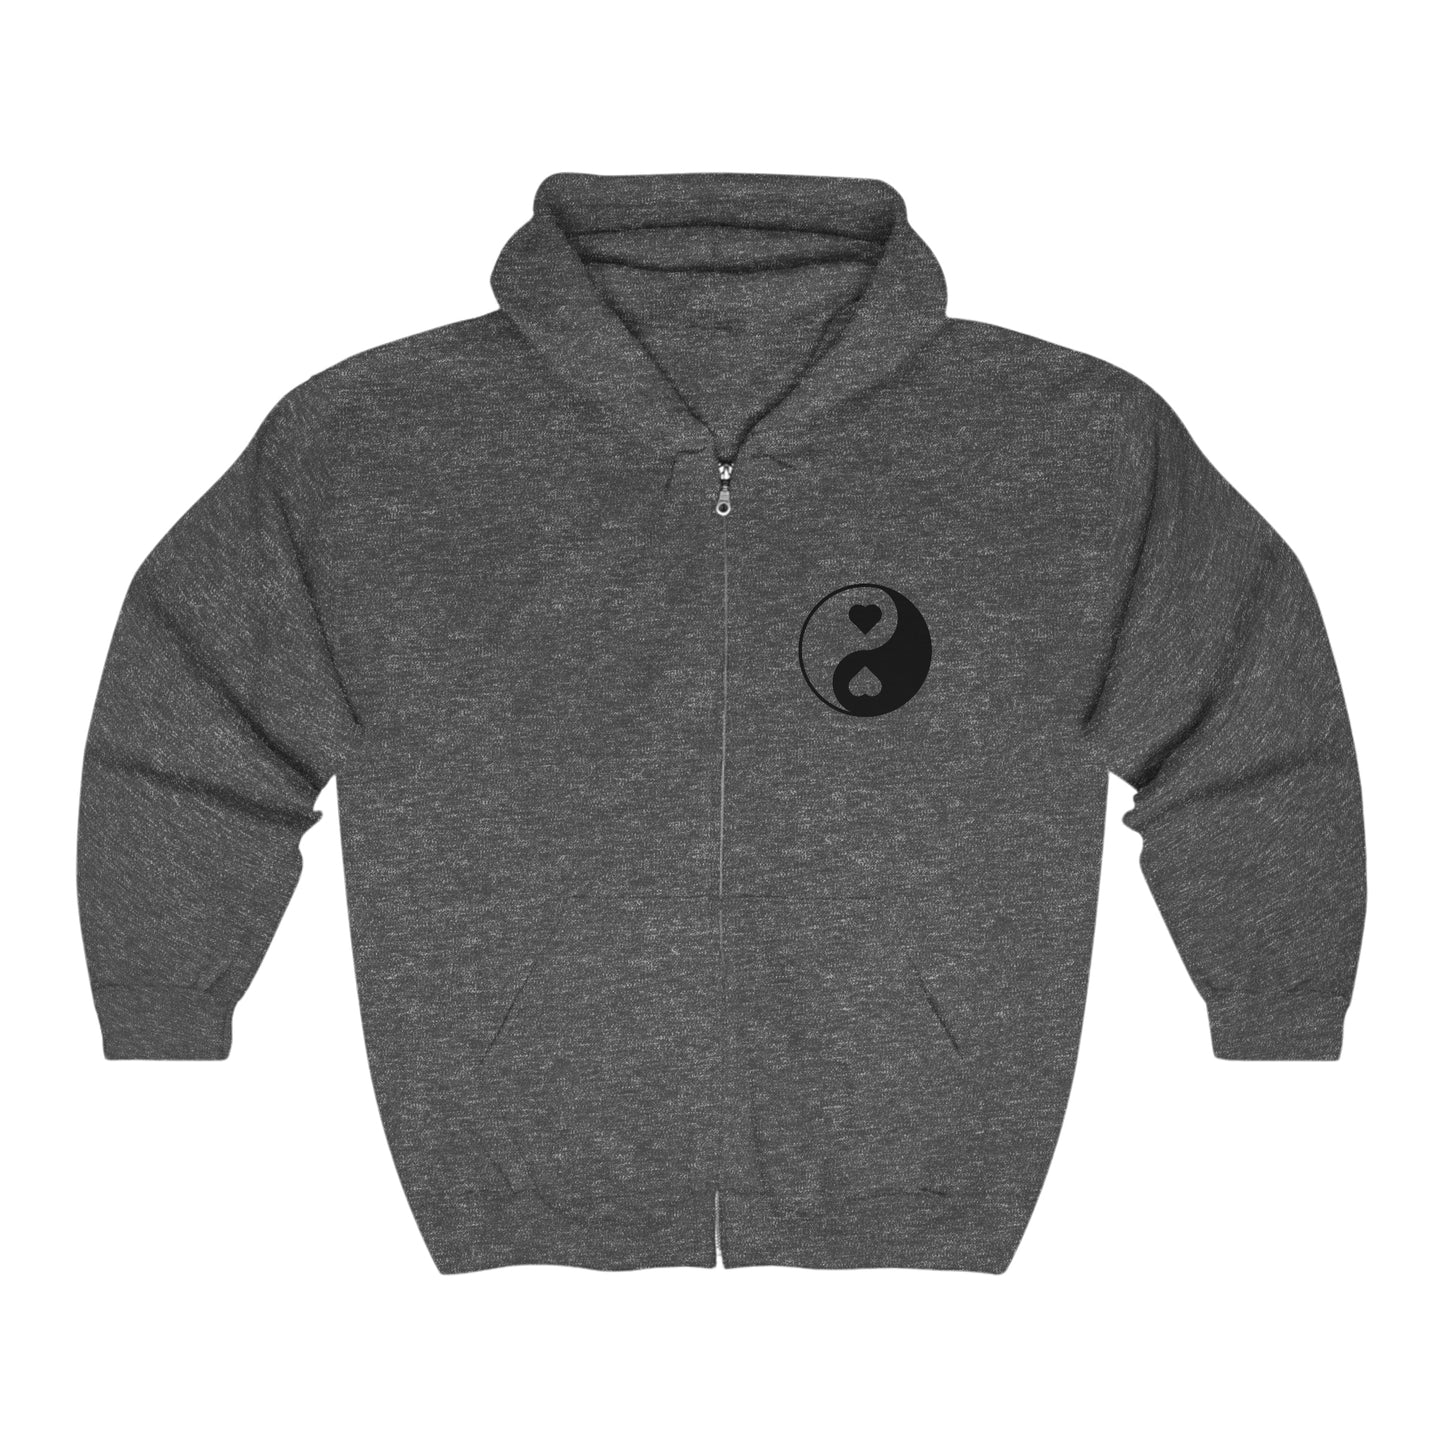 Cool, Calm and Cozy Collection- Unisex Heavy Blend™ Full Zip Hooded Sweatshirt IDK What's Next